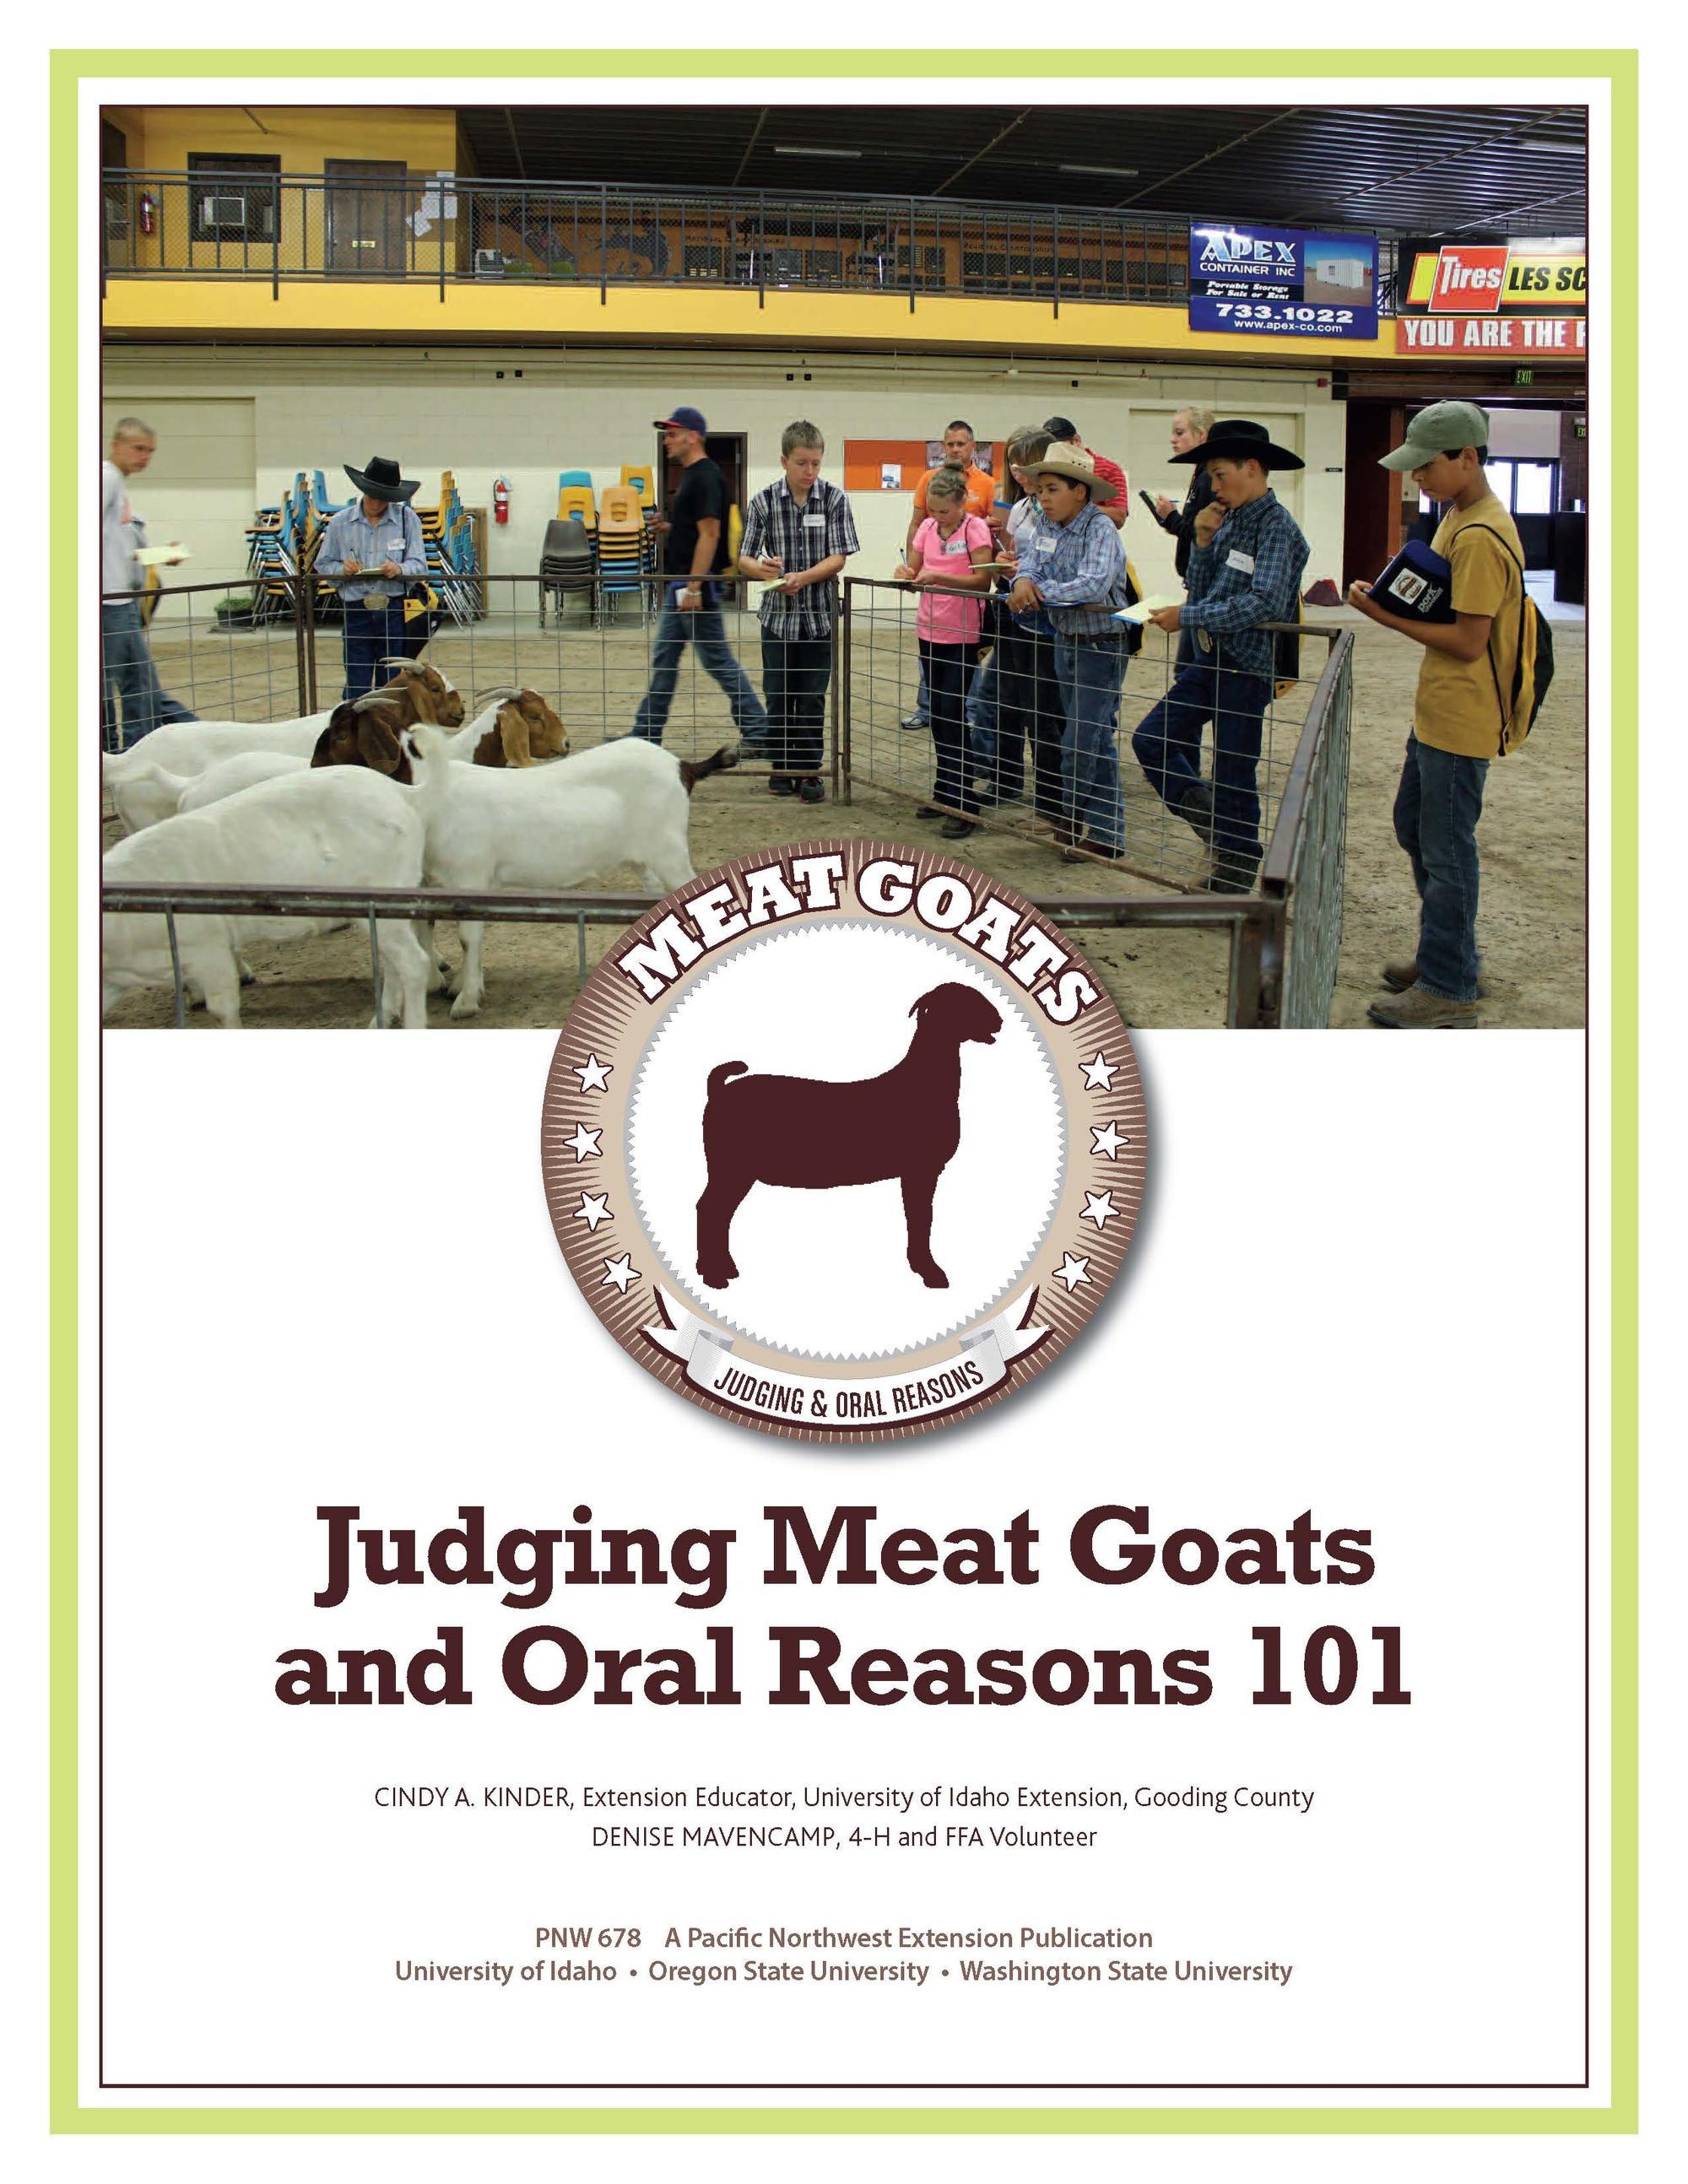 Cover image of "Judging Meat Goats and Oral Reasons"